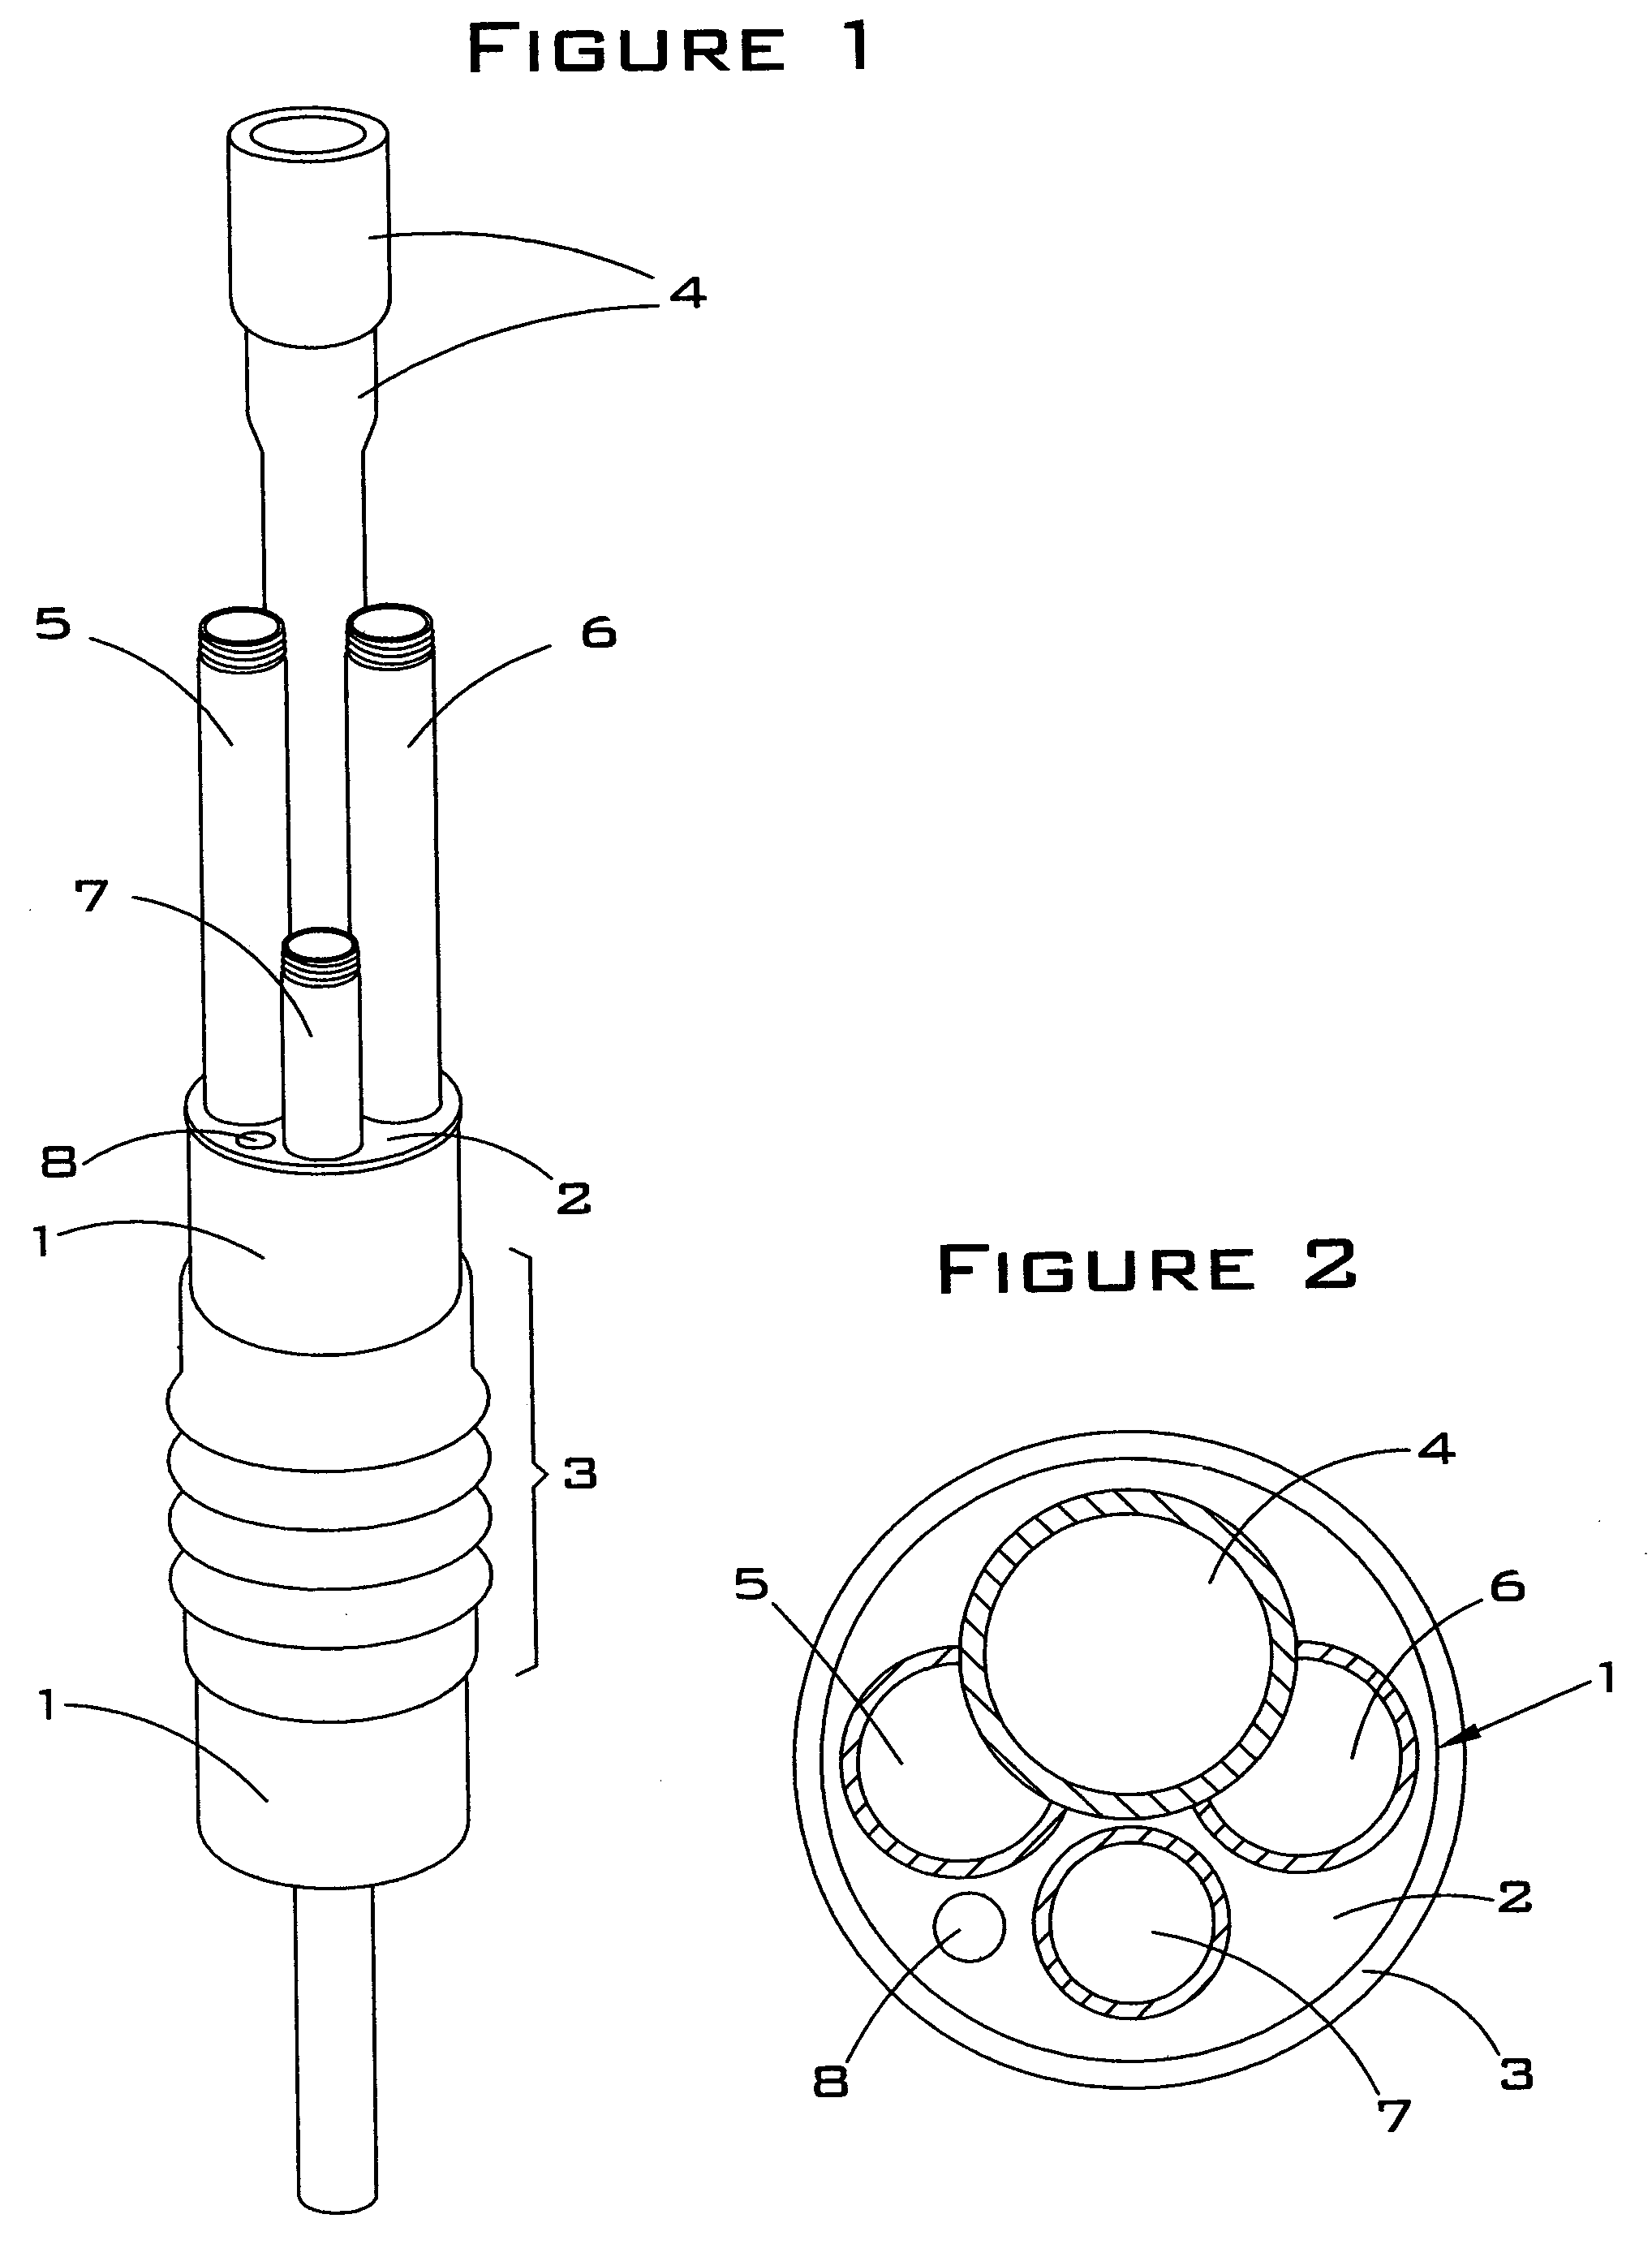 Multi-string production packer and method of using the same